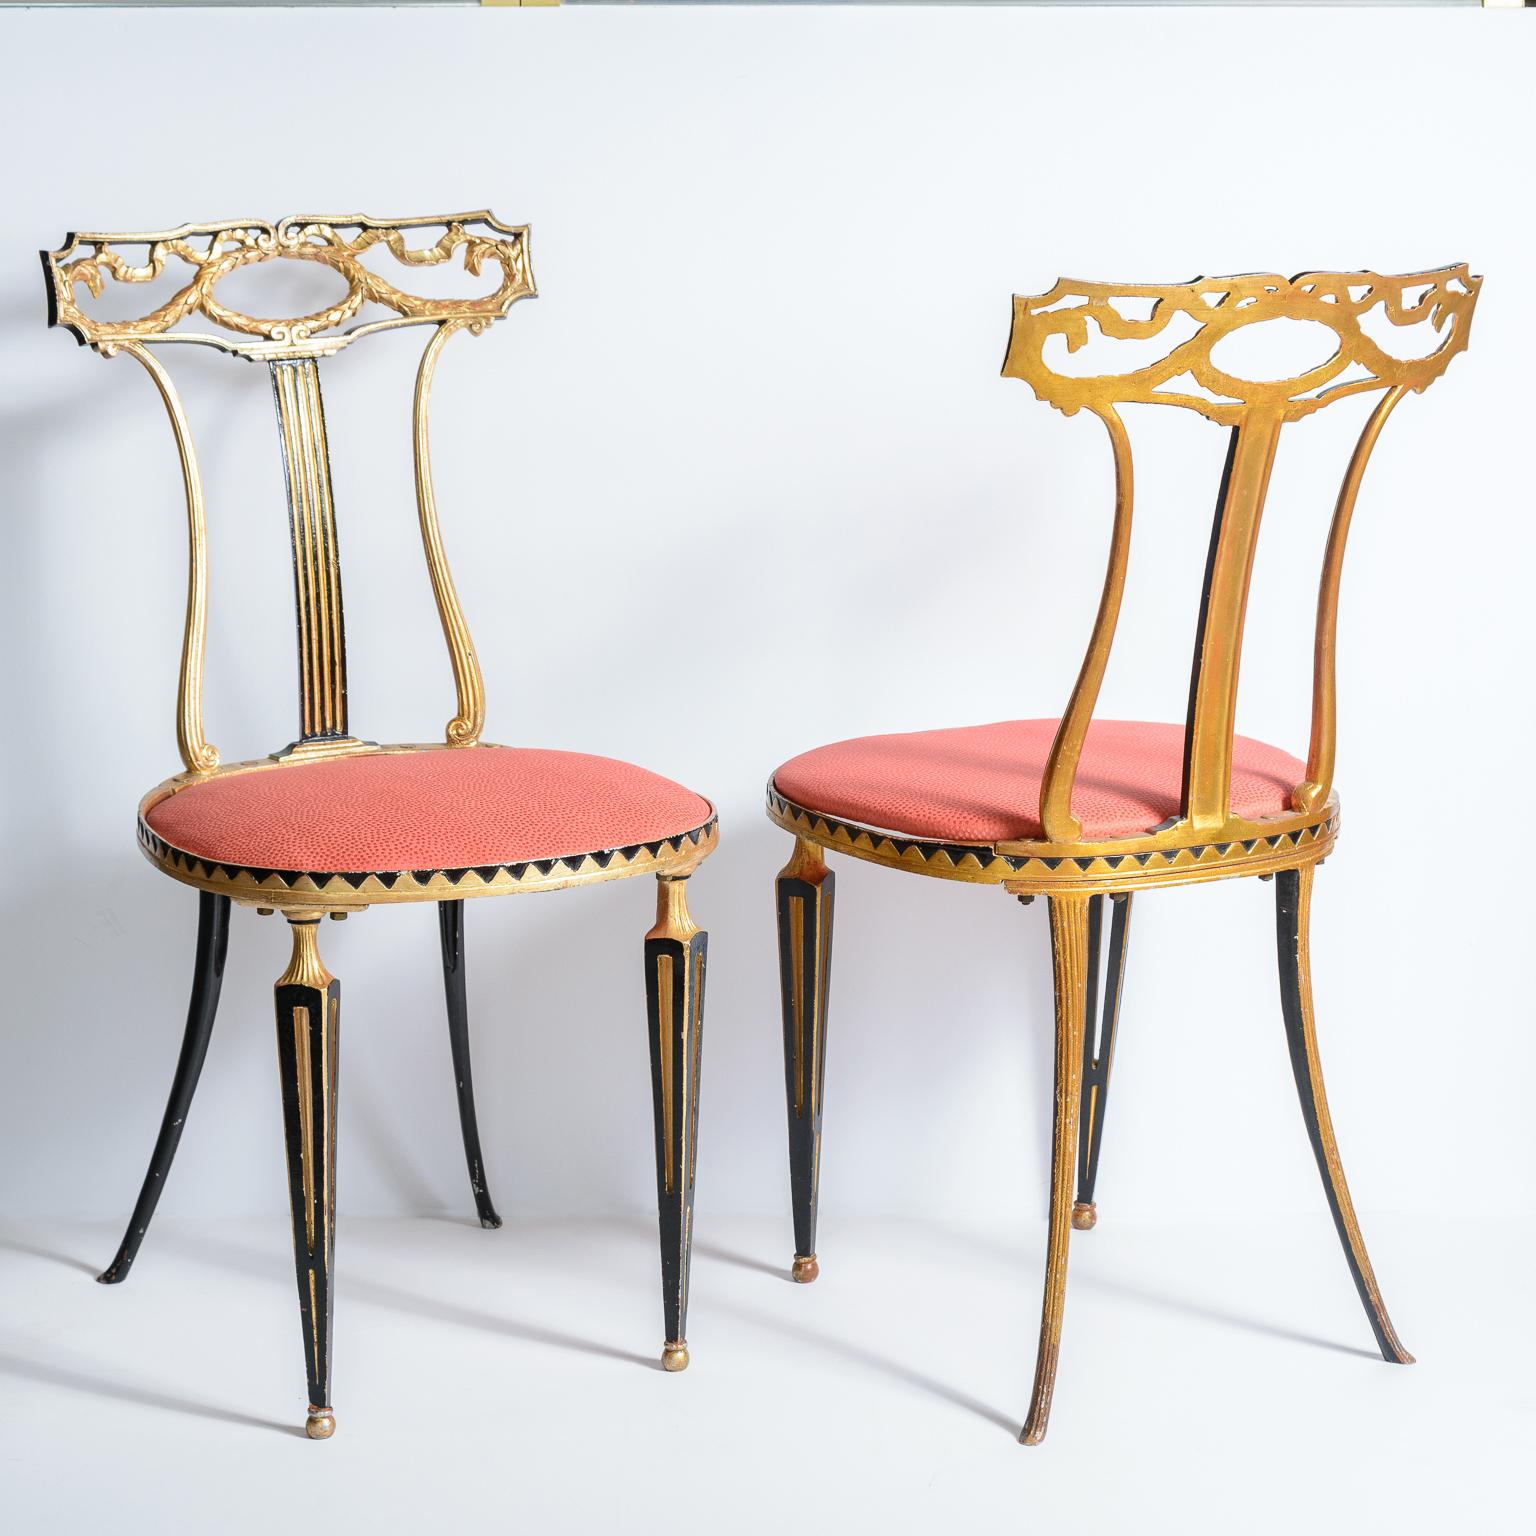 This is a beautiful pair of Italian Neoclassical style metal chairs by Palladio., c.1950s.
These chairs would be perfect in many locations of your home.
 Newly upholstered .
Very good vintage condition, minor wear to the gilding, due to age and use.